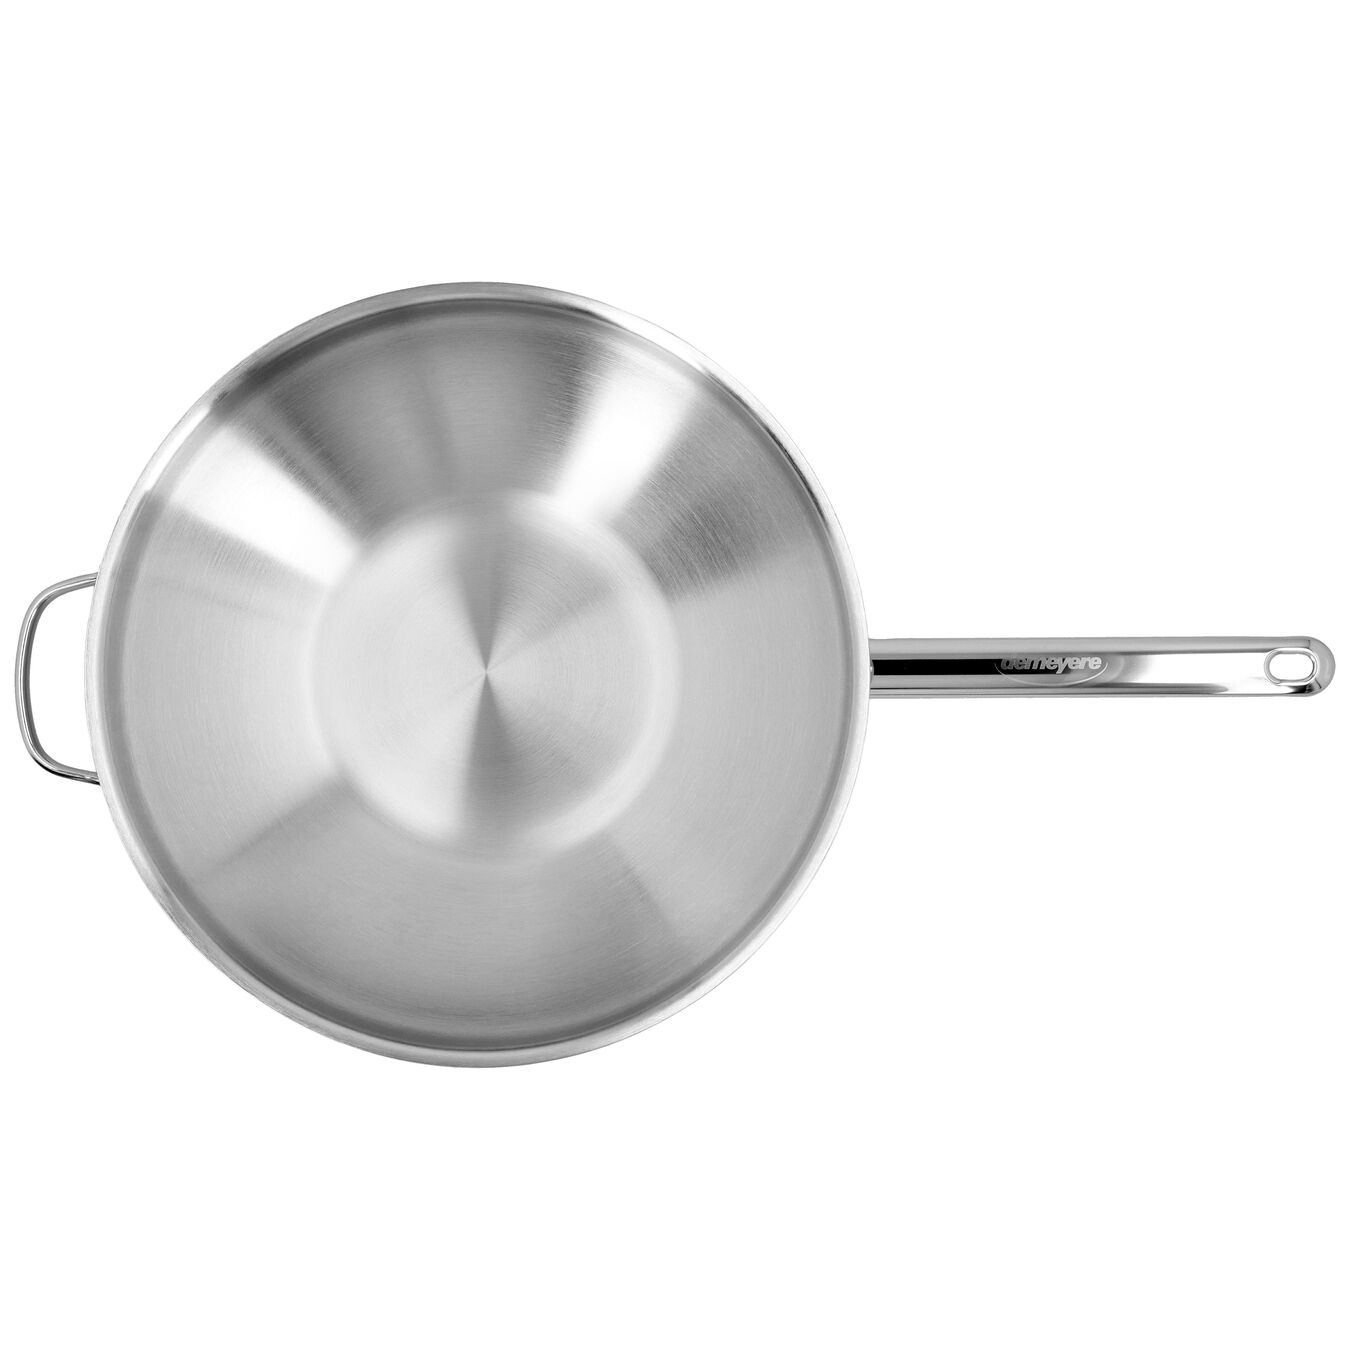 Demeyere Apollo 7 Wok with flat bottom in 18/10 stainless steel